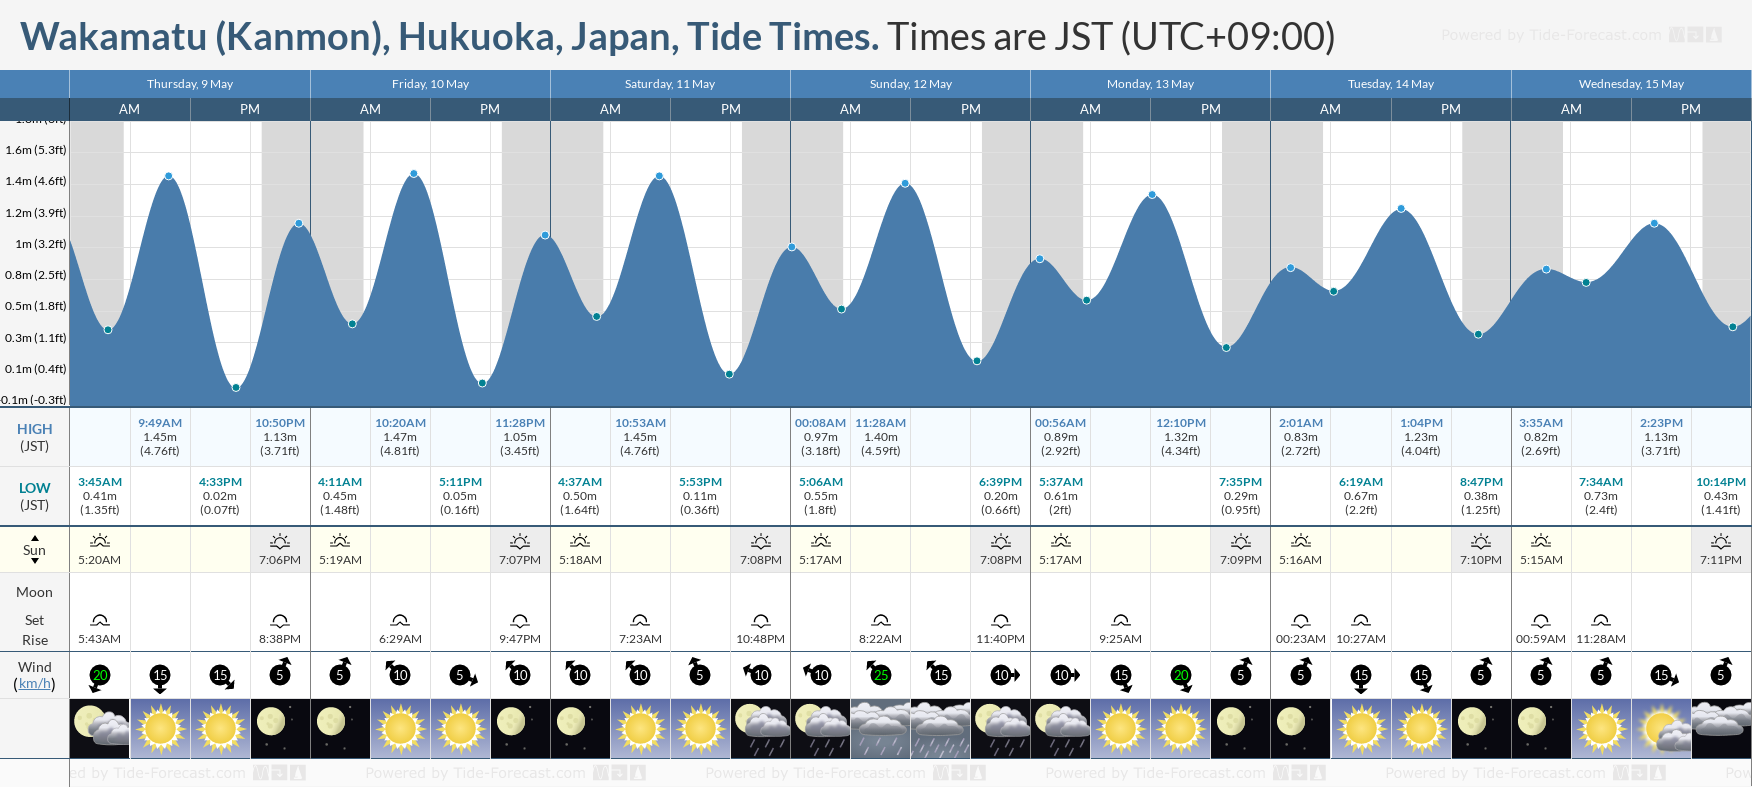 Wakamatu (Kanmon), Hukuoka, Japan Tide Chart including high and low tide tide times for the next 7 days